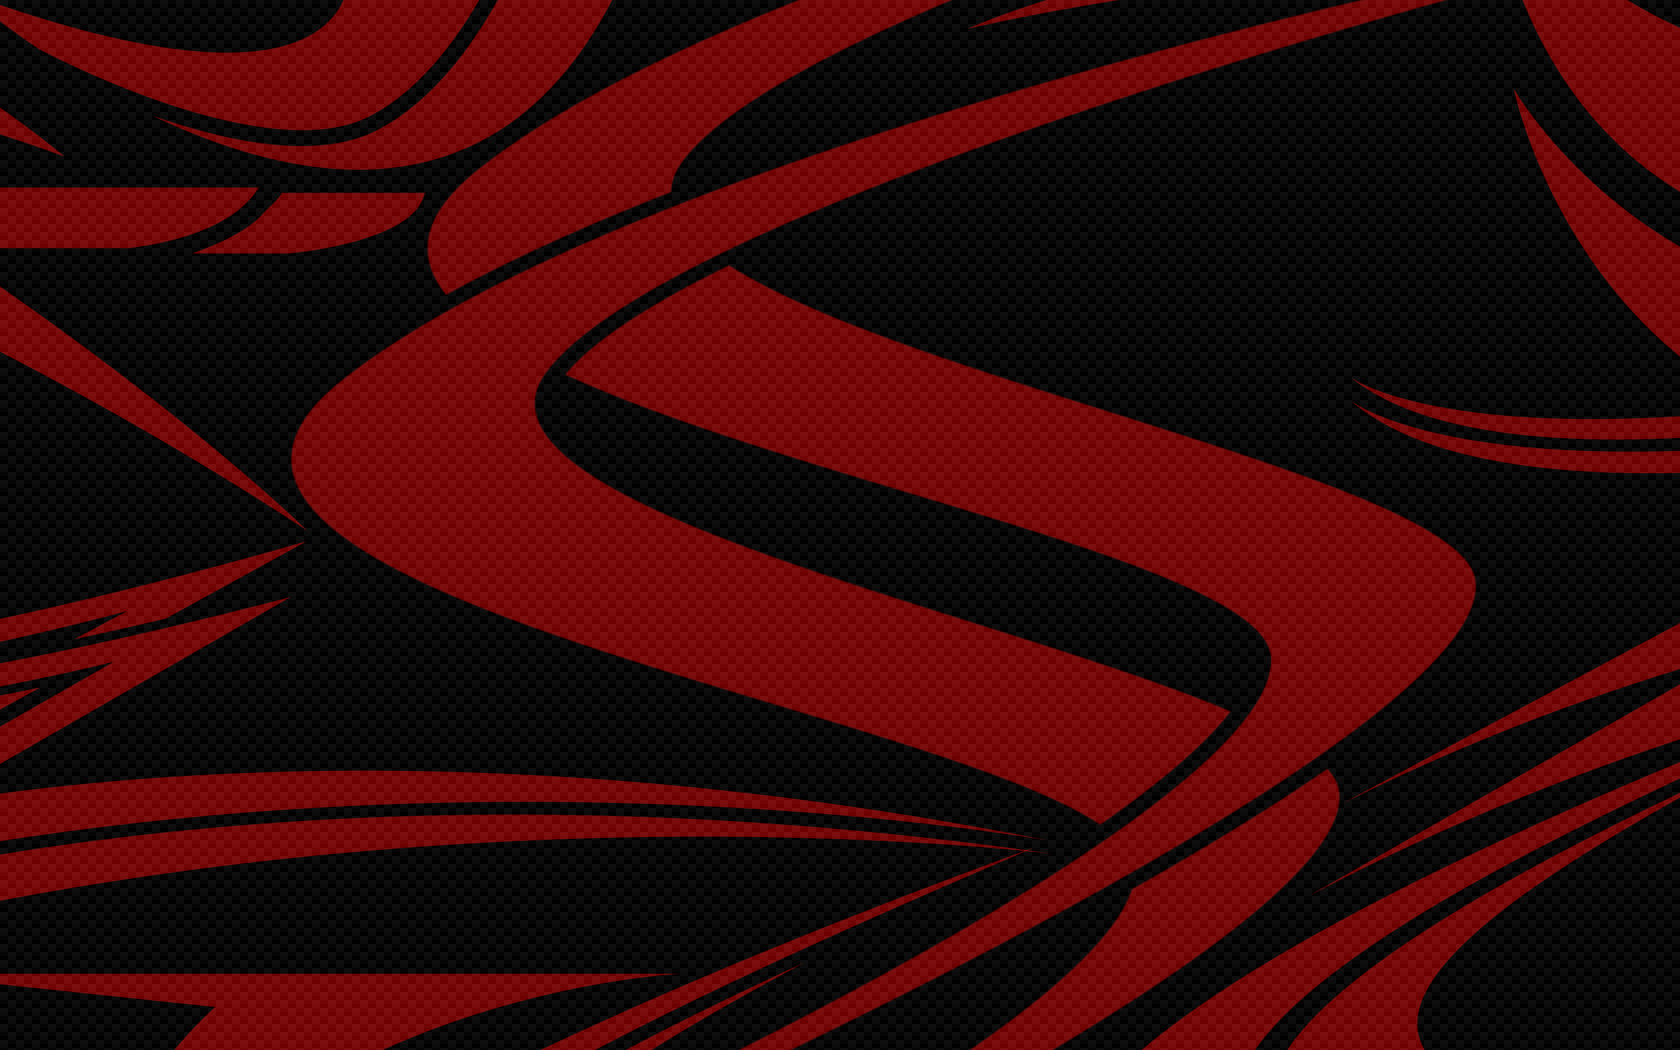 Red & Black Carbon wallpapers | Red & Black Carbon stock photos